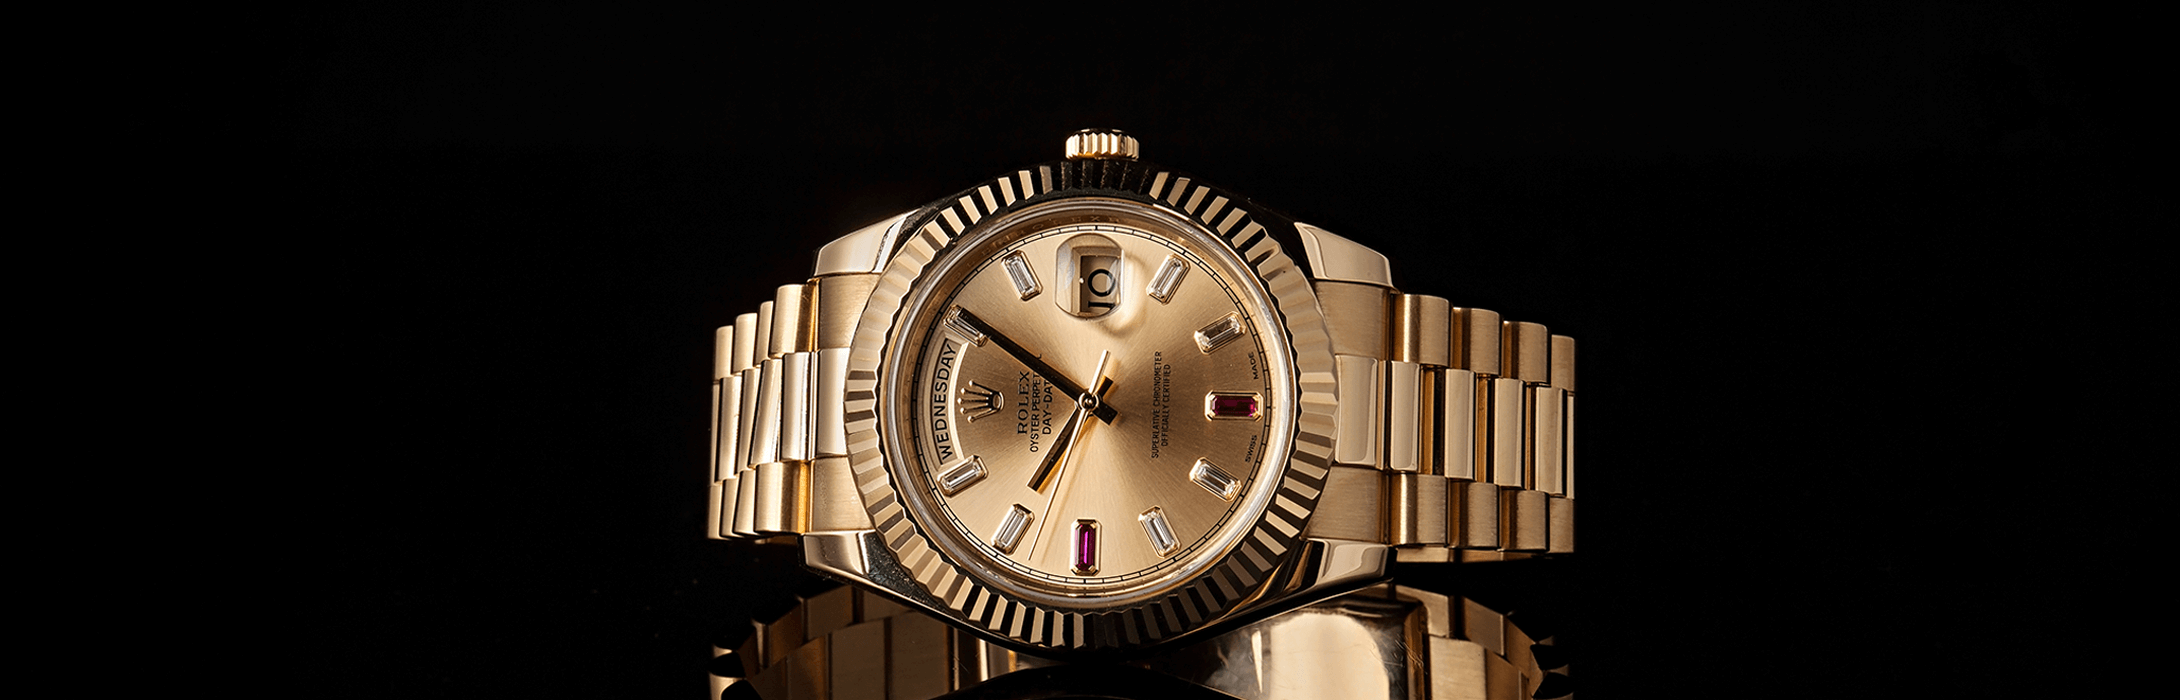 Rolex Finance: A Rolex in Time for the Holidays | Bob's Watches